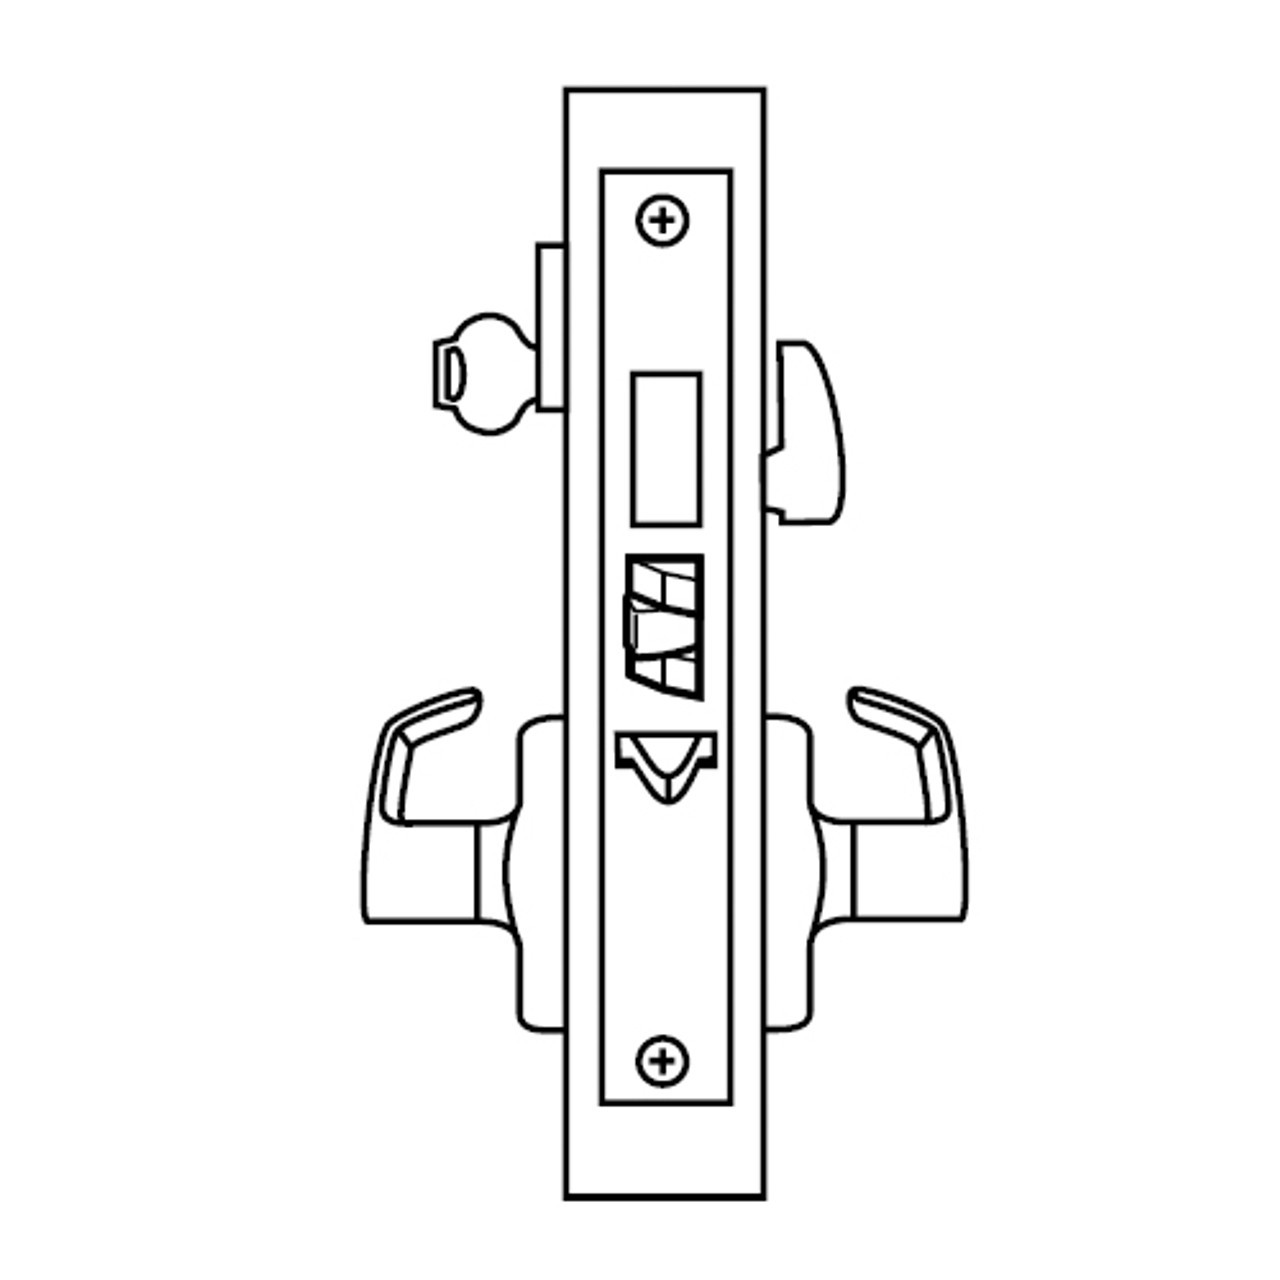 ML2075-DSB-626-LC-RH Corbin Russwin ML2000 Series Mortise Entrance or Office Security Locksets with Dirke Lever and Deadbolt in Satin Chrome